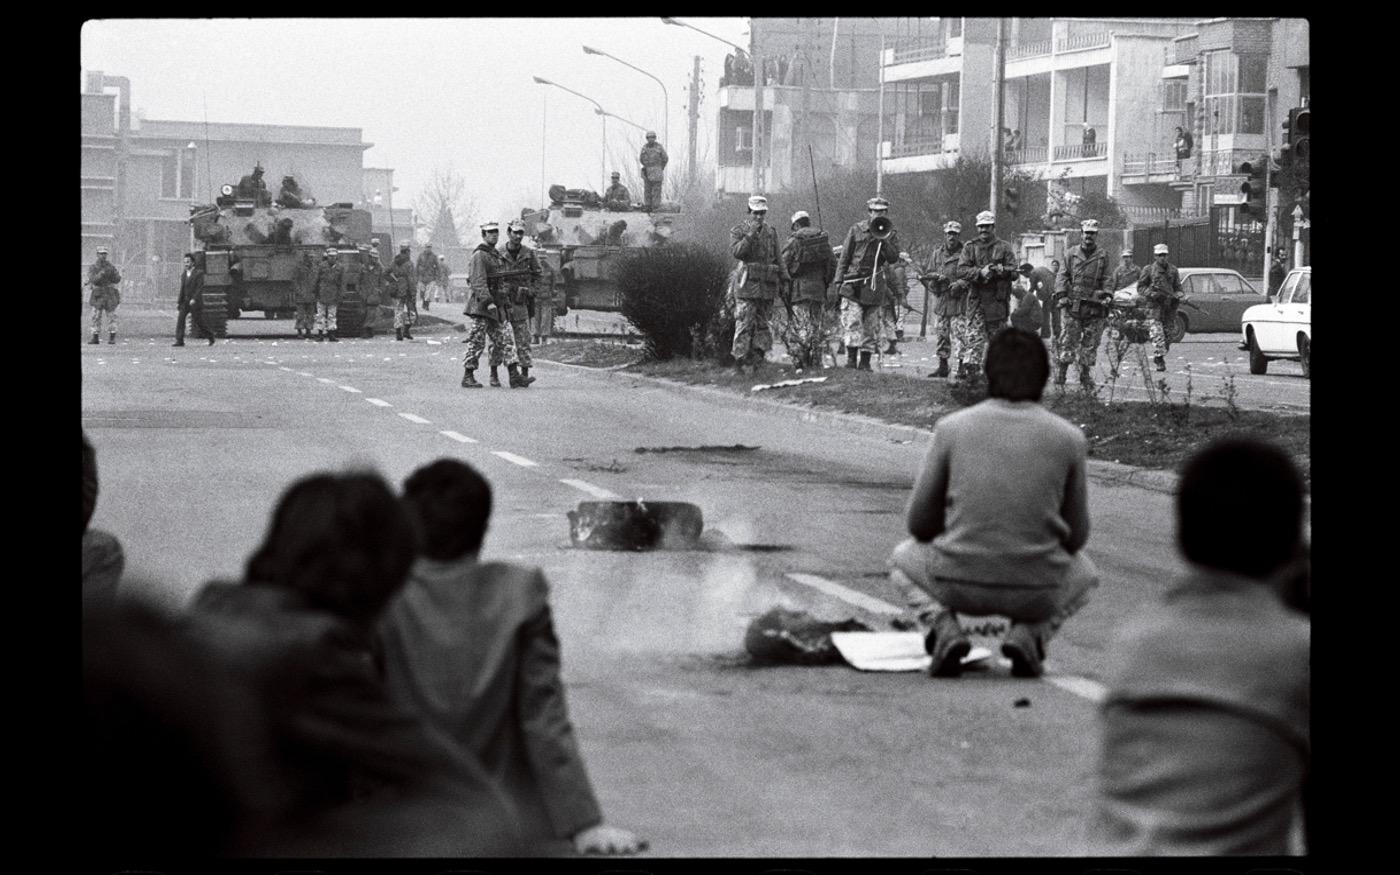 Anti Shah demonstrators face down the Army, in ongoing street demonstrations   Tehran 1978 : Looking Back: 60 Years of Photographs : David Burnett | Photographer